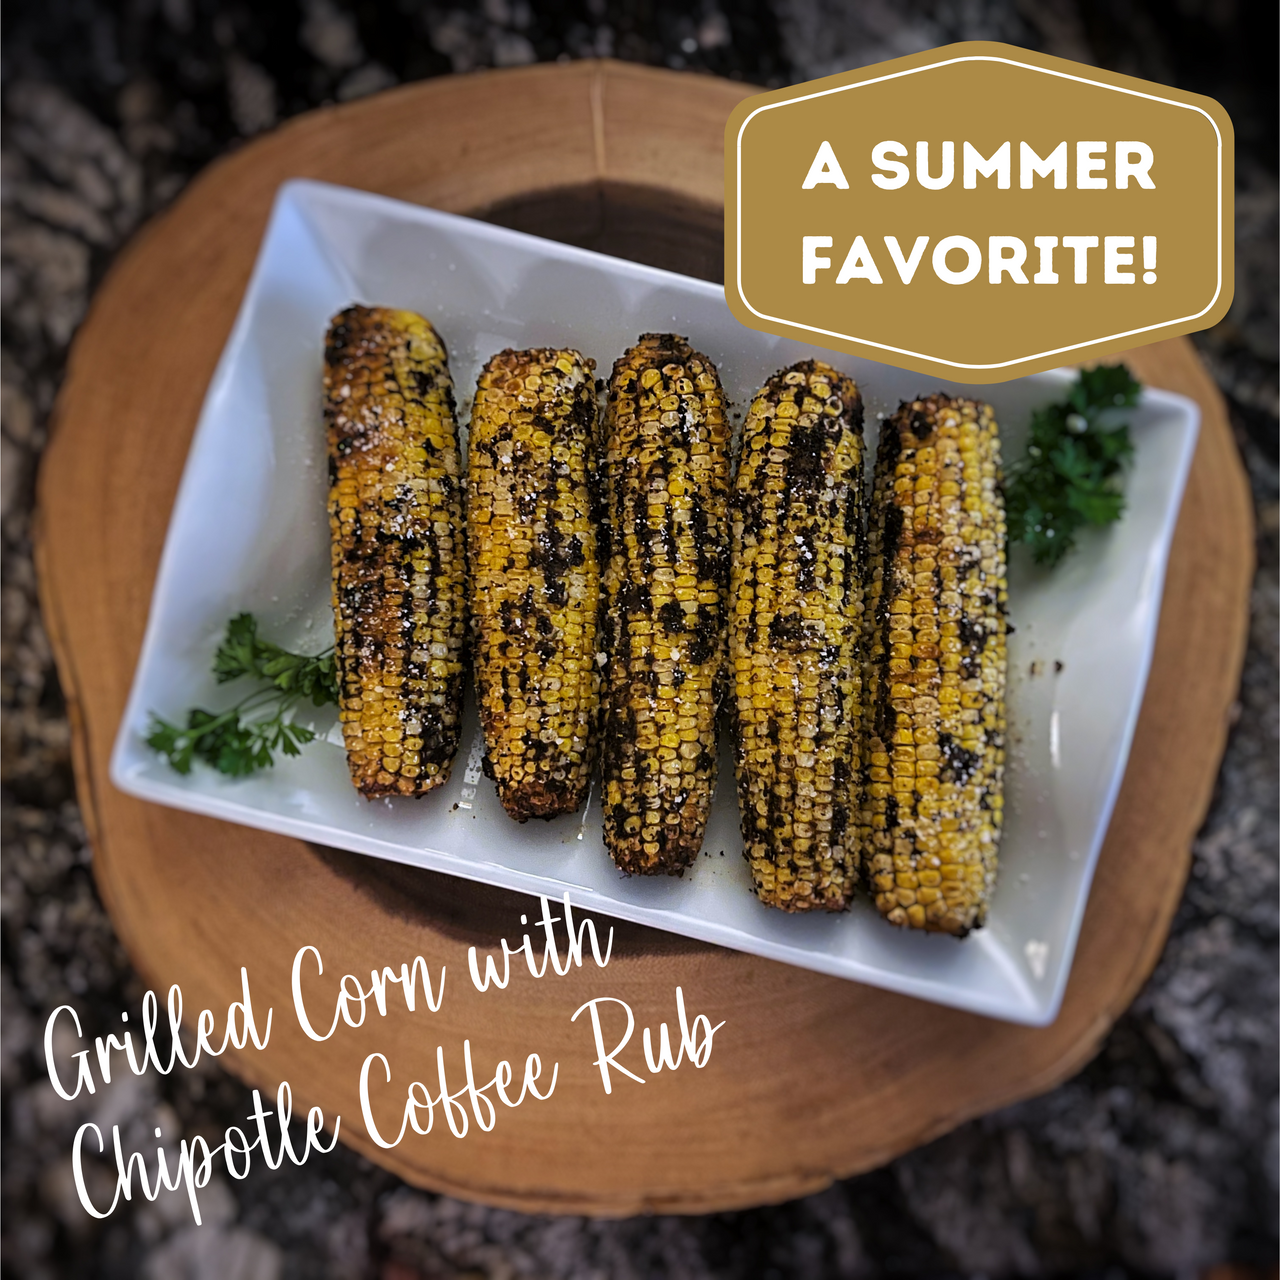 Grilled Corn with Chipotle Coffee Rub